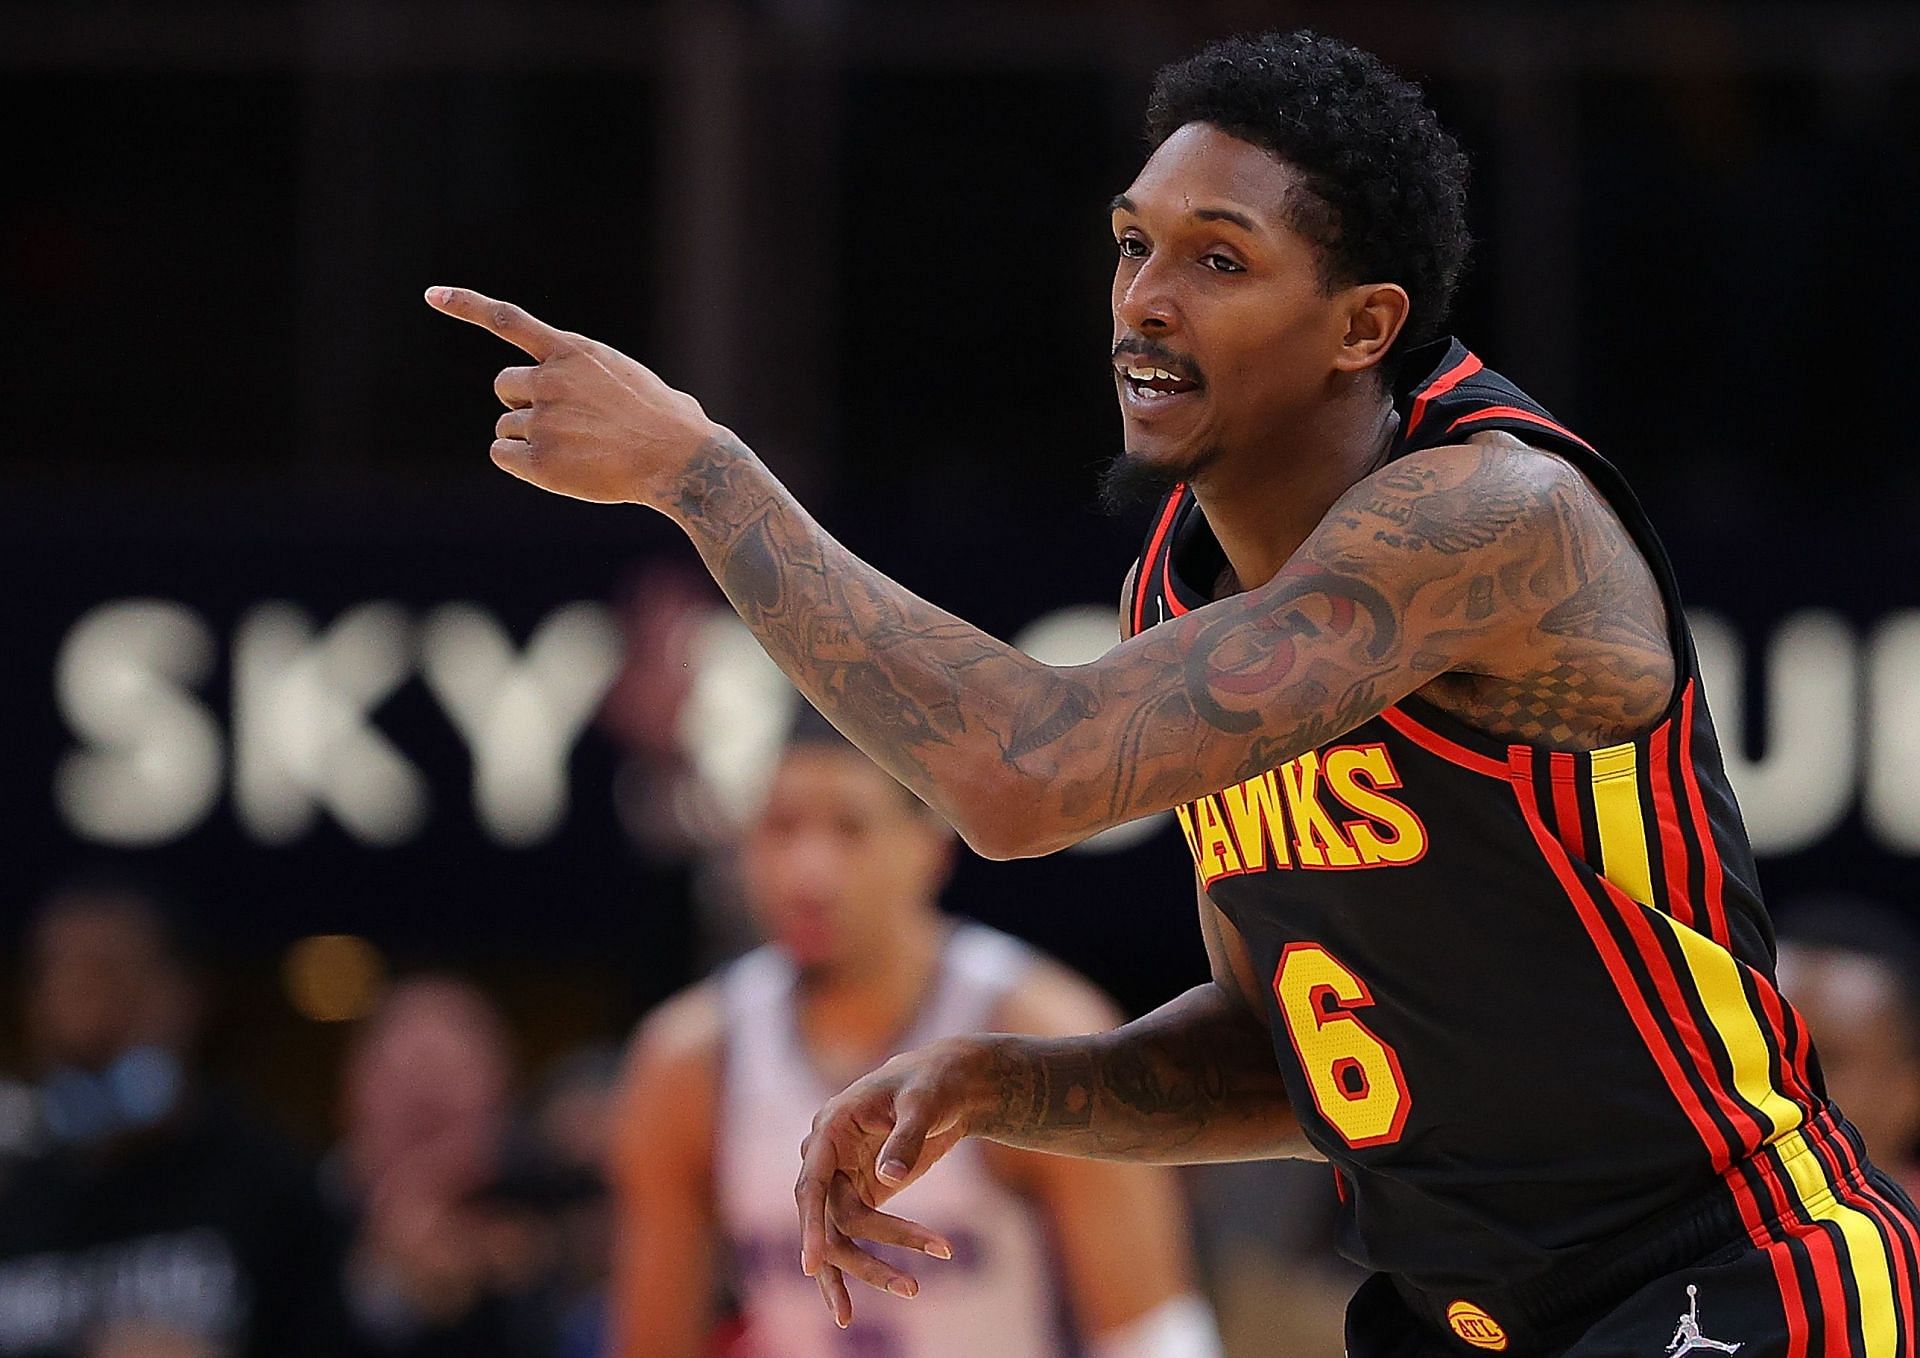 Lou Williams uses Kyle Kuzma as example why the old dress code is needed.